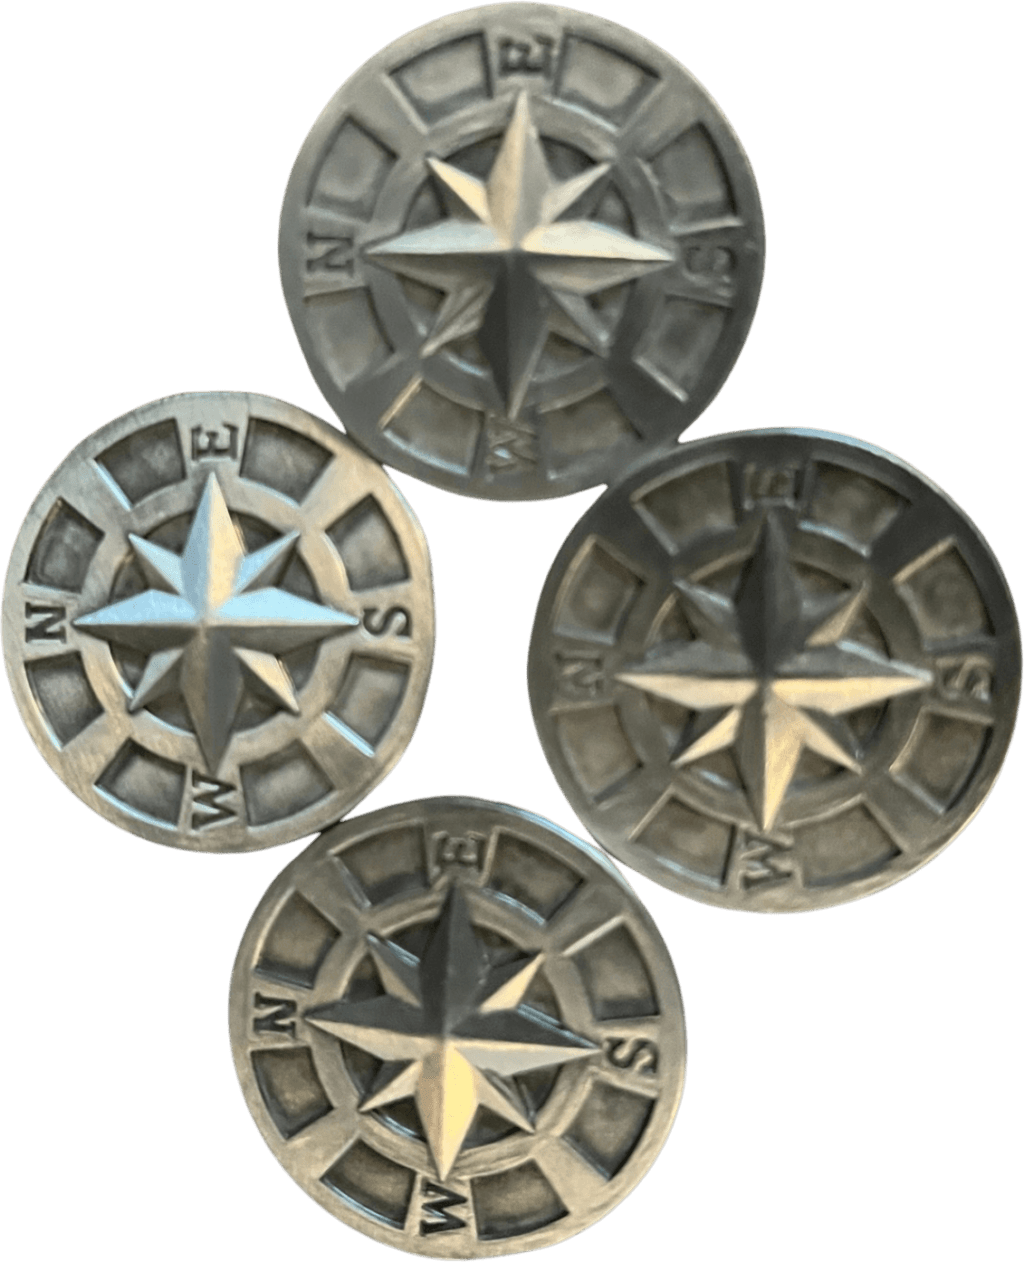 Four metal compass buttons on a black background for home decor.